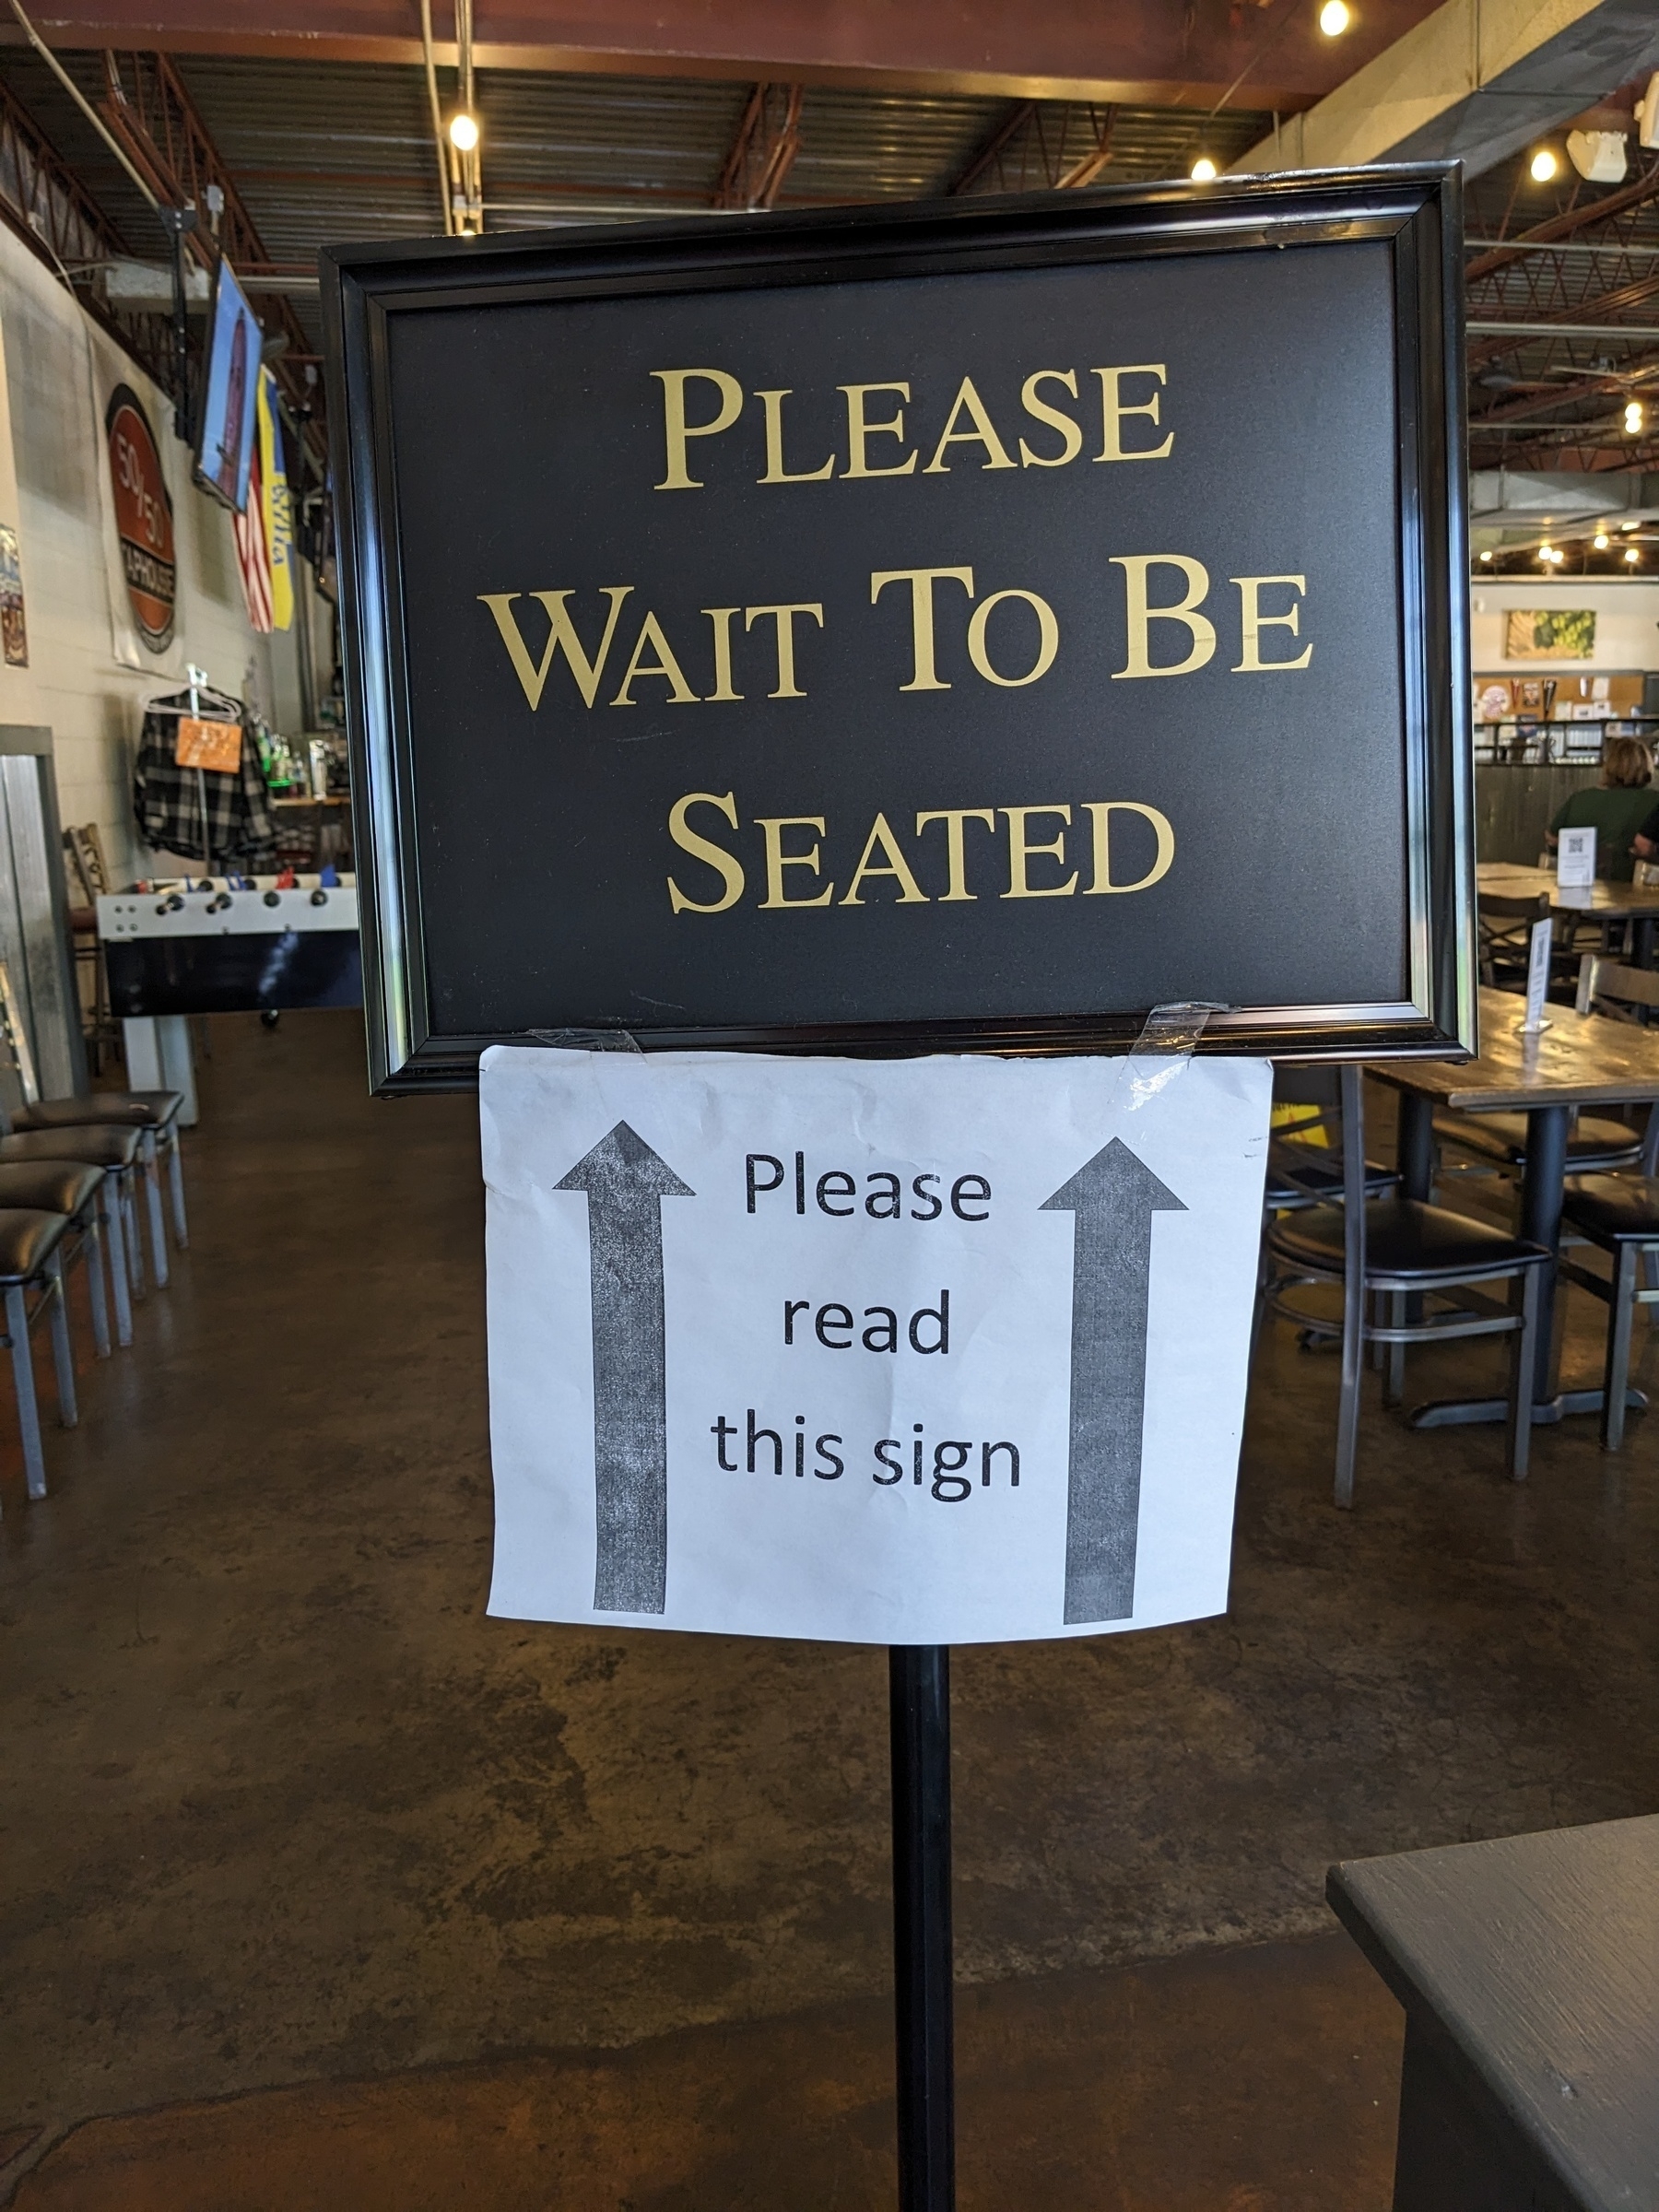 Commercial restaurant sign that says, 'Please wait to be seated,' with printed sign tape underneath that says, 'Please read this sign' 